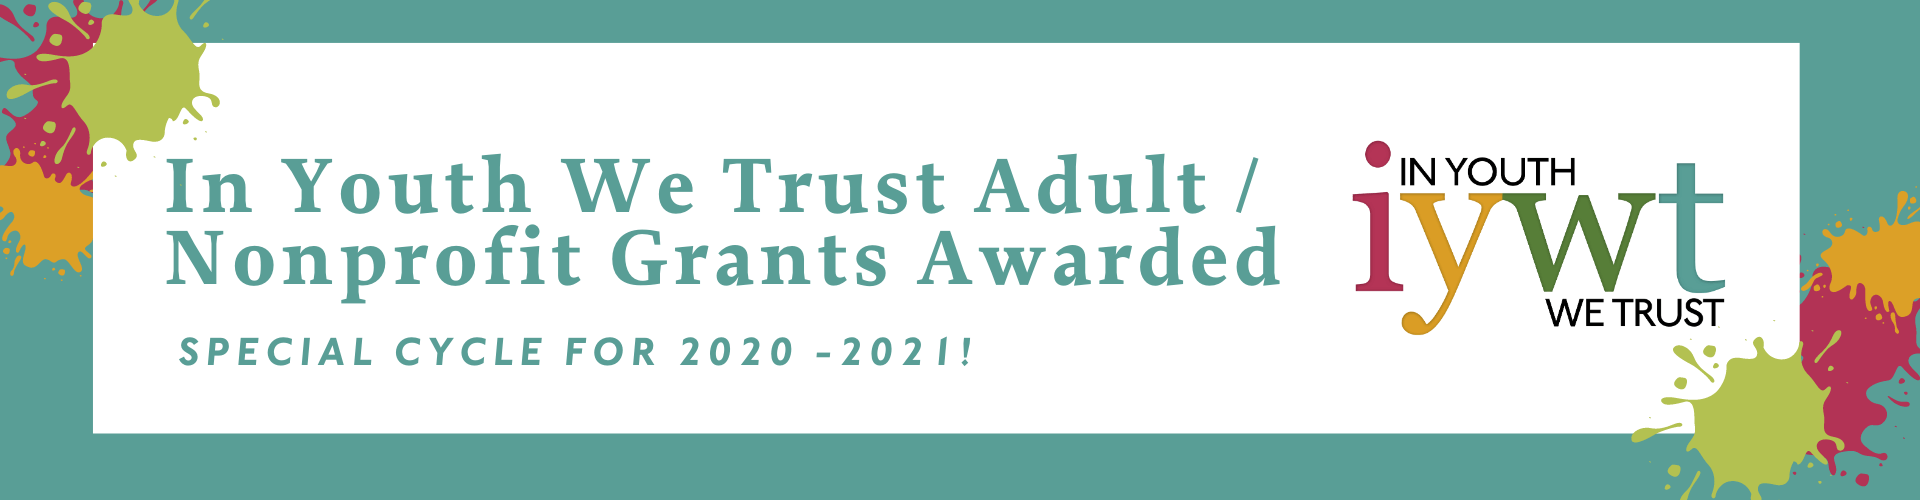 In Youth We Trust Adult/Nonprofit Grants Awarded - Special Cycle for 2020-2021